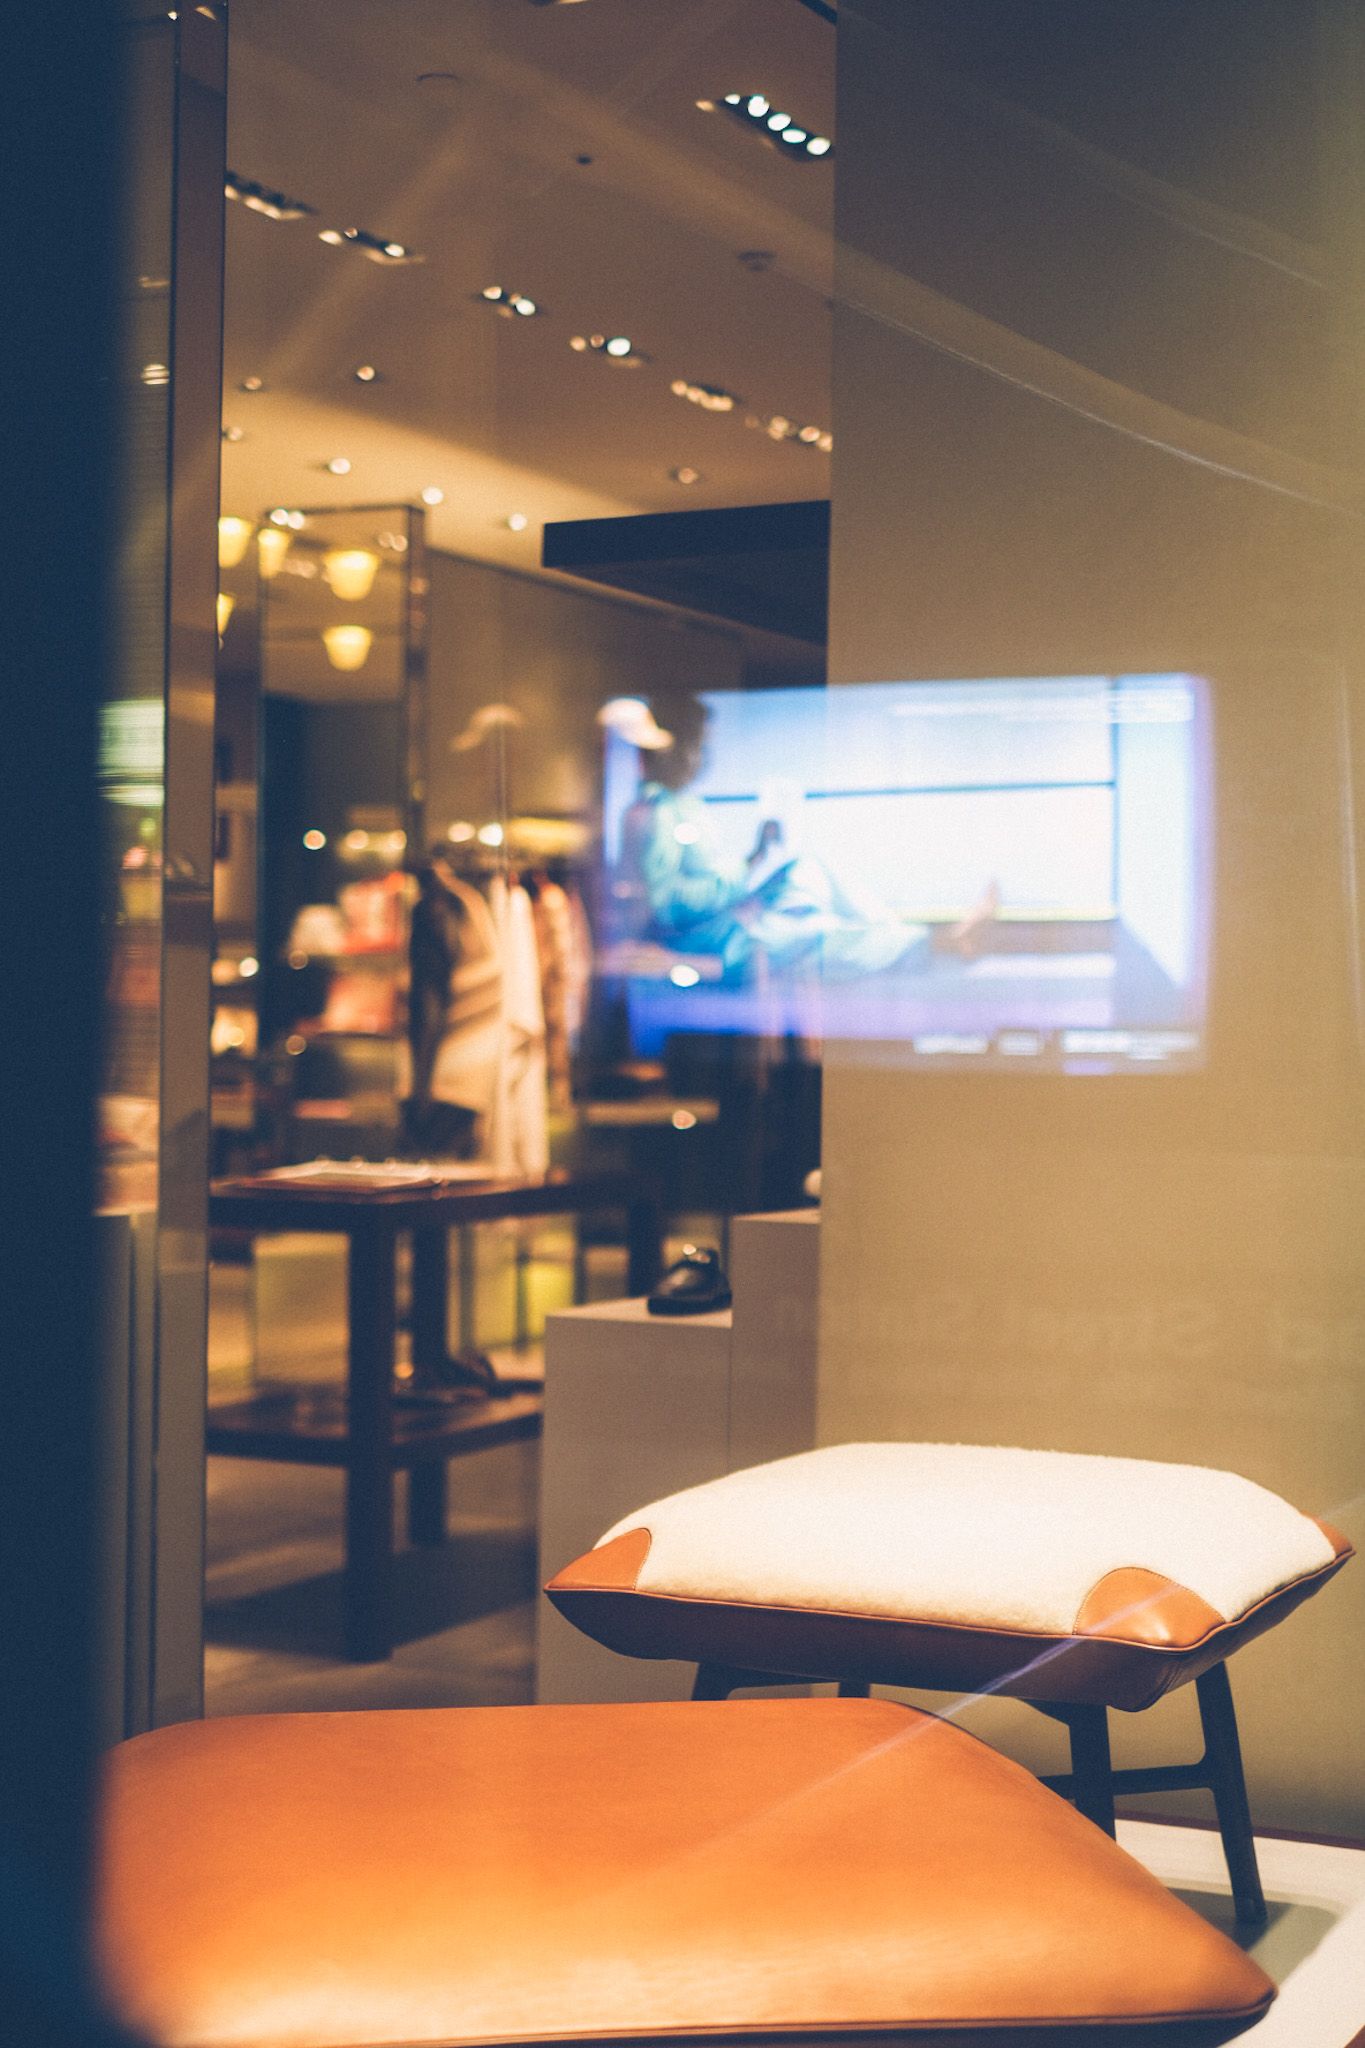 A television screen is reflected against the glass of a window display, fine seating showcased.